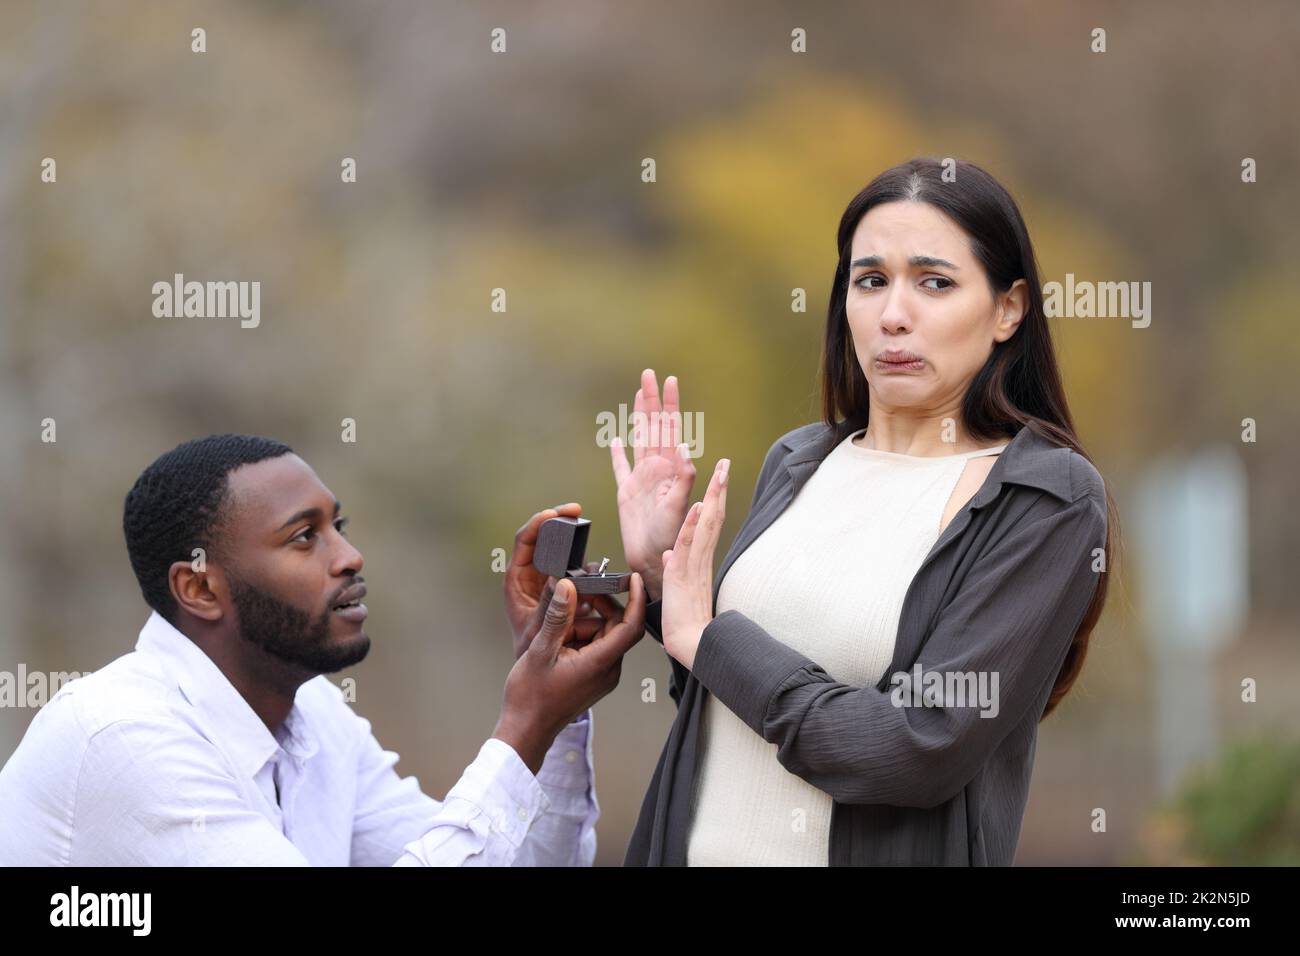 Man proposing marriage and scared woman rejecting Stock Photo